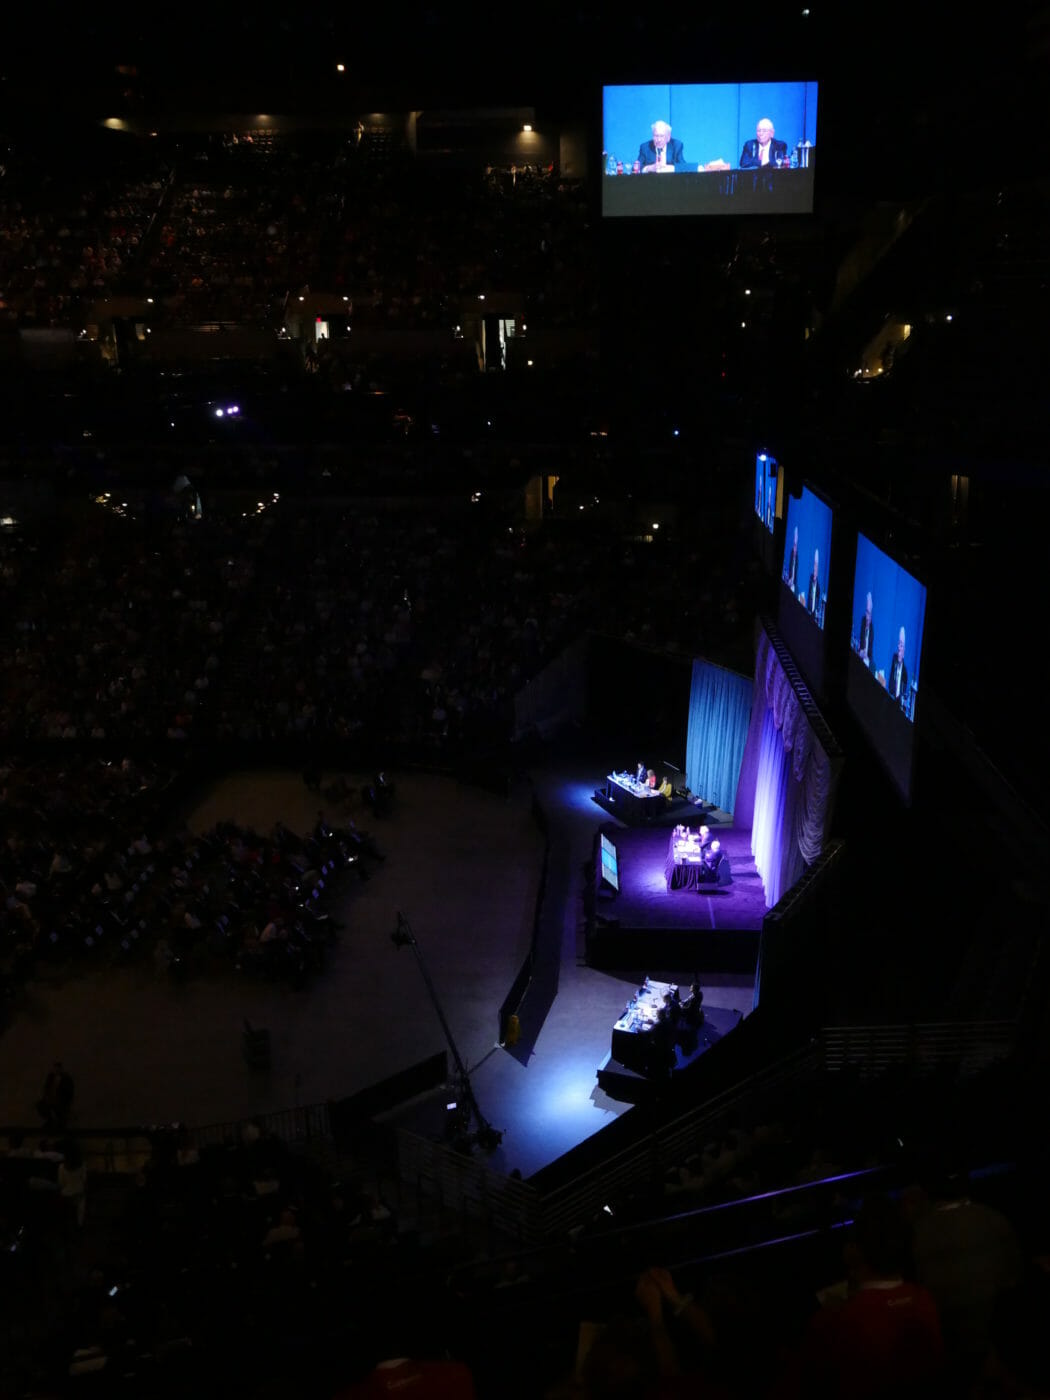 We give you our Berkshire Hathaway Shareholders' Meeting photos